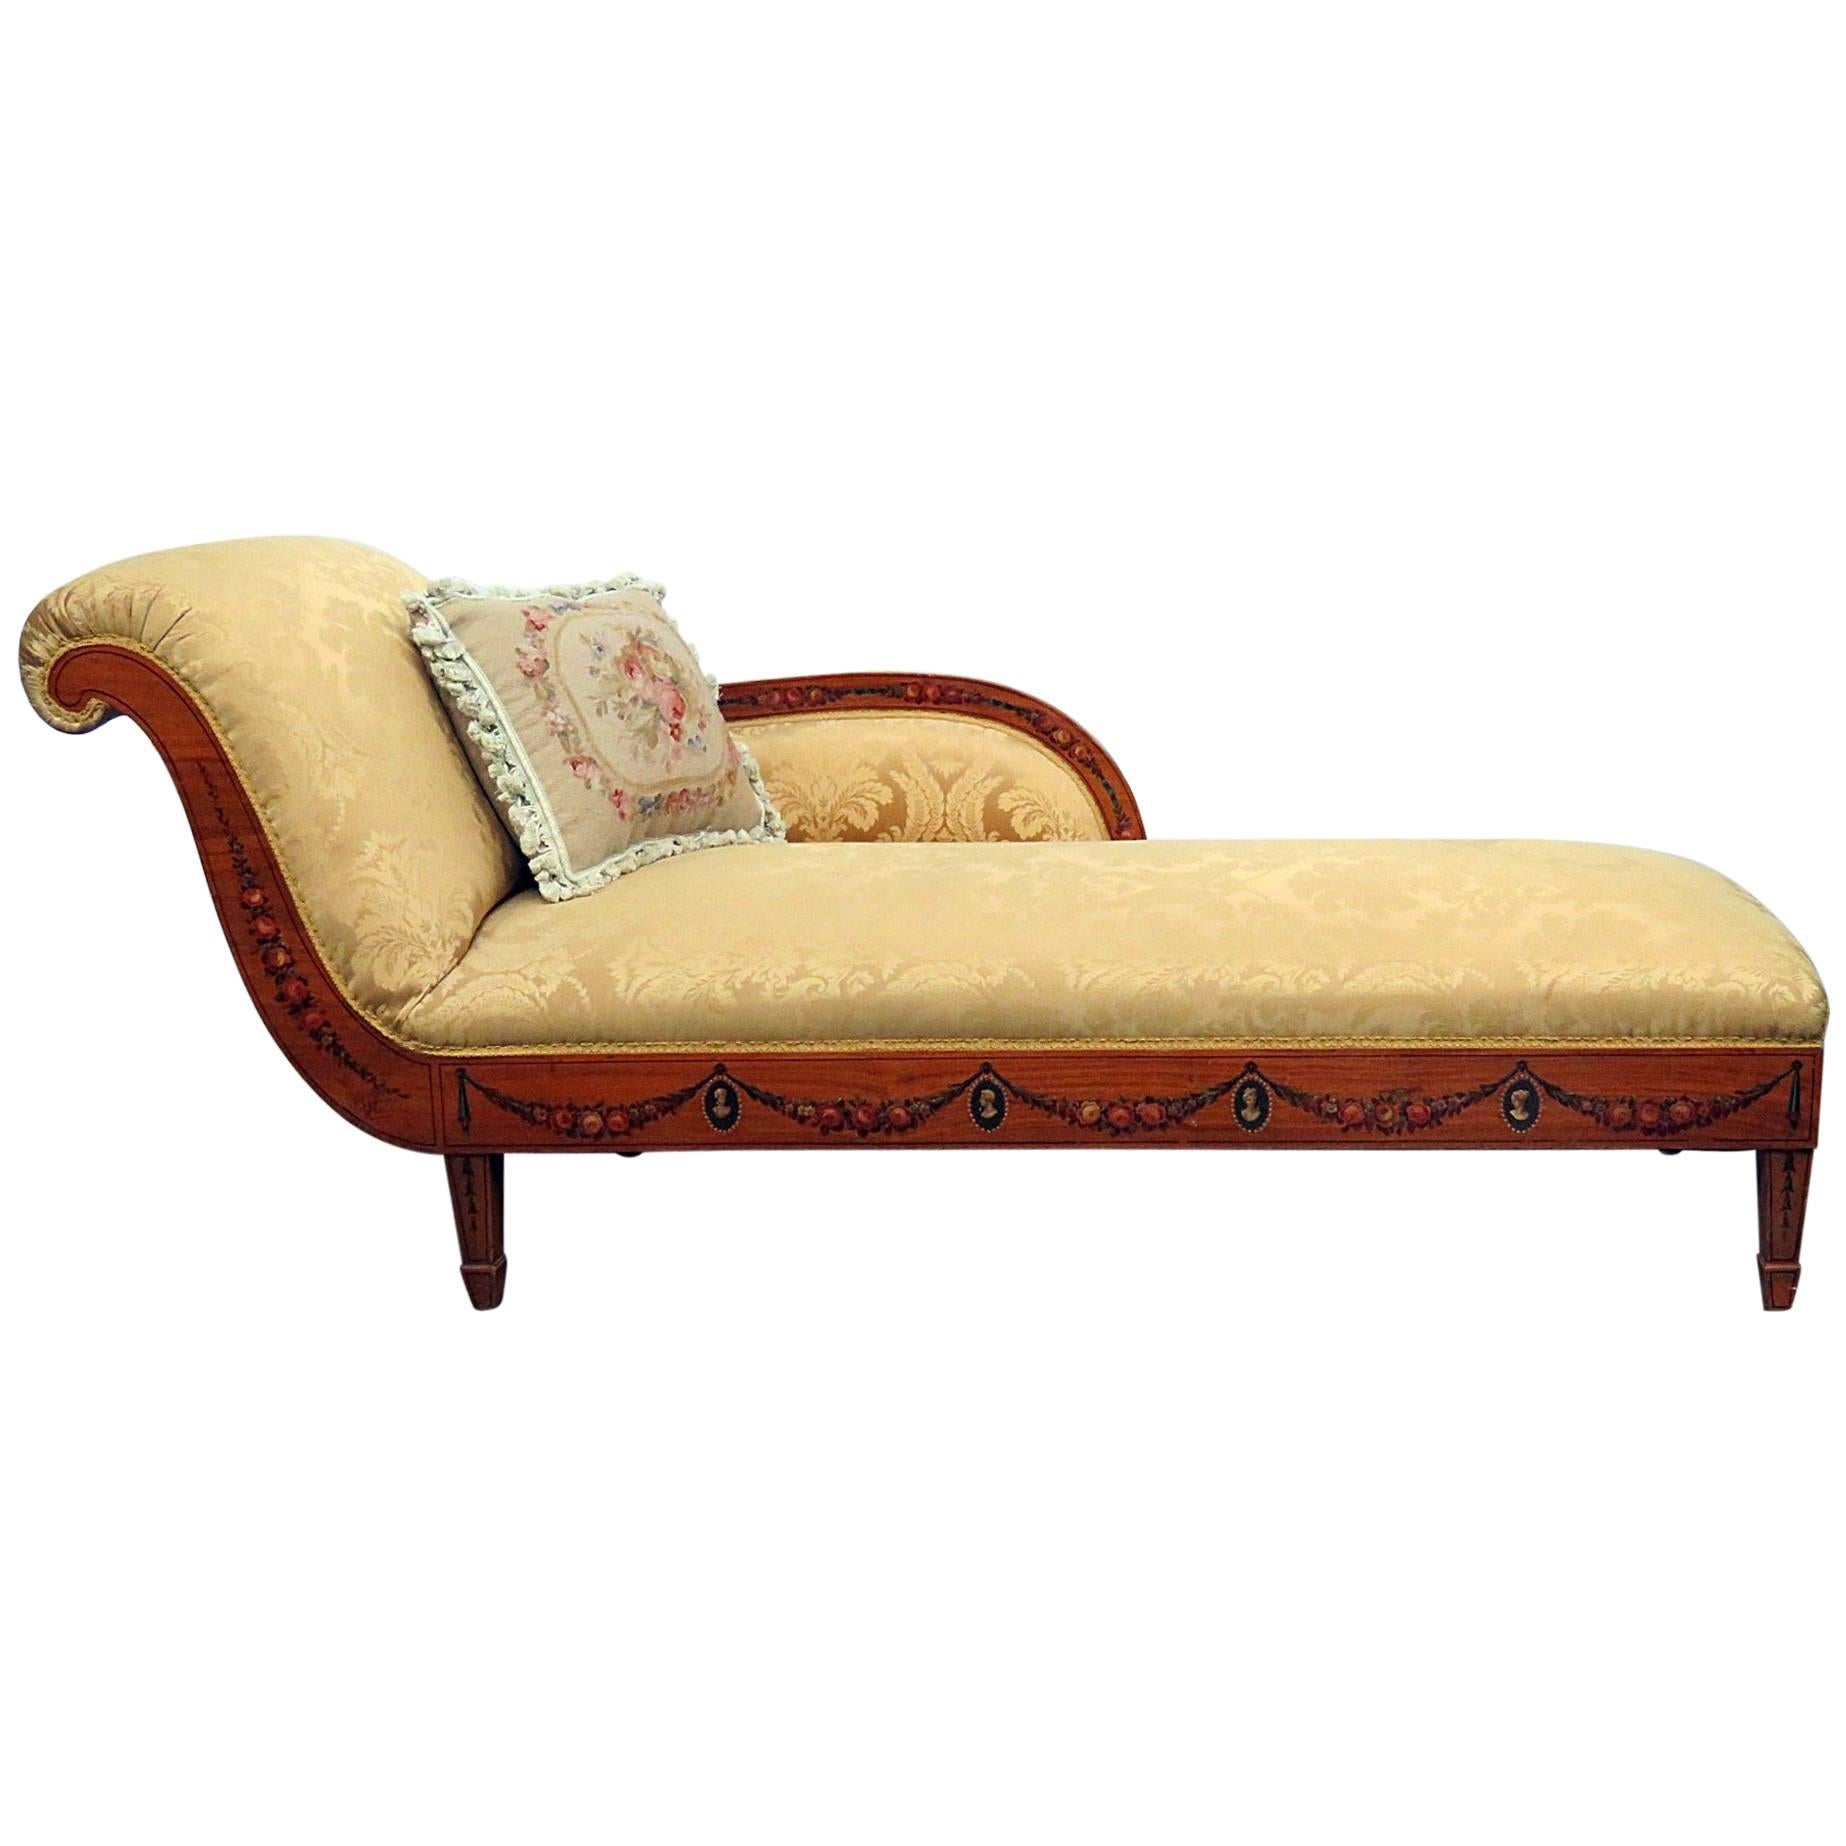 Early English 1850s Era Satinwood Adams Painted Chaise Longue Recamier Daybed